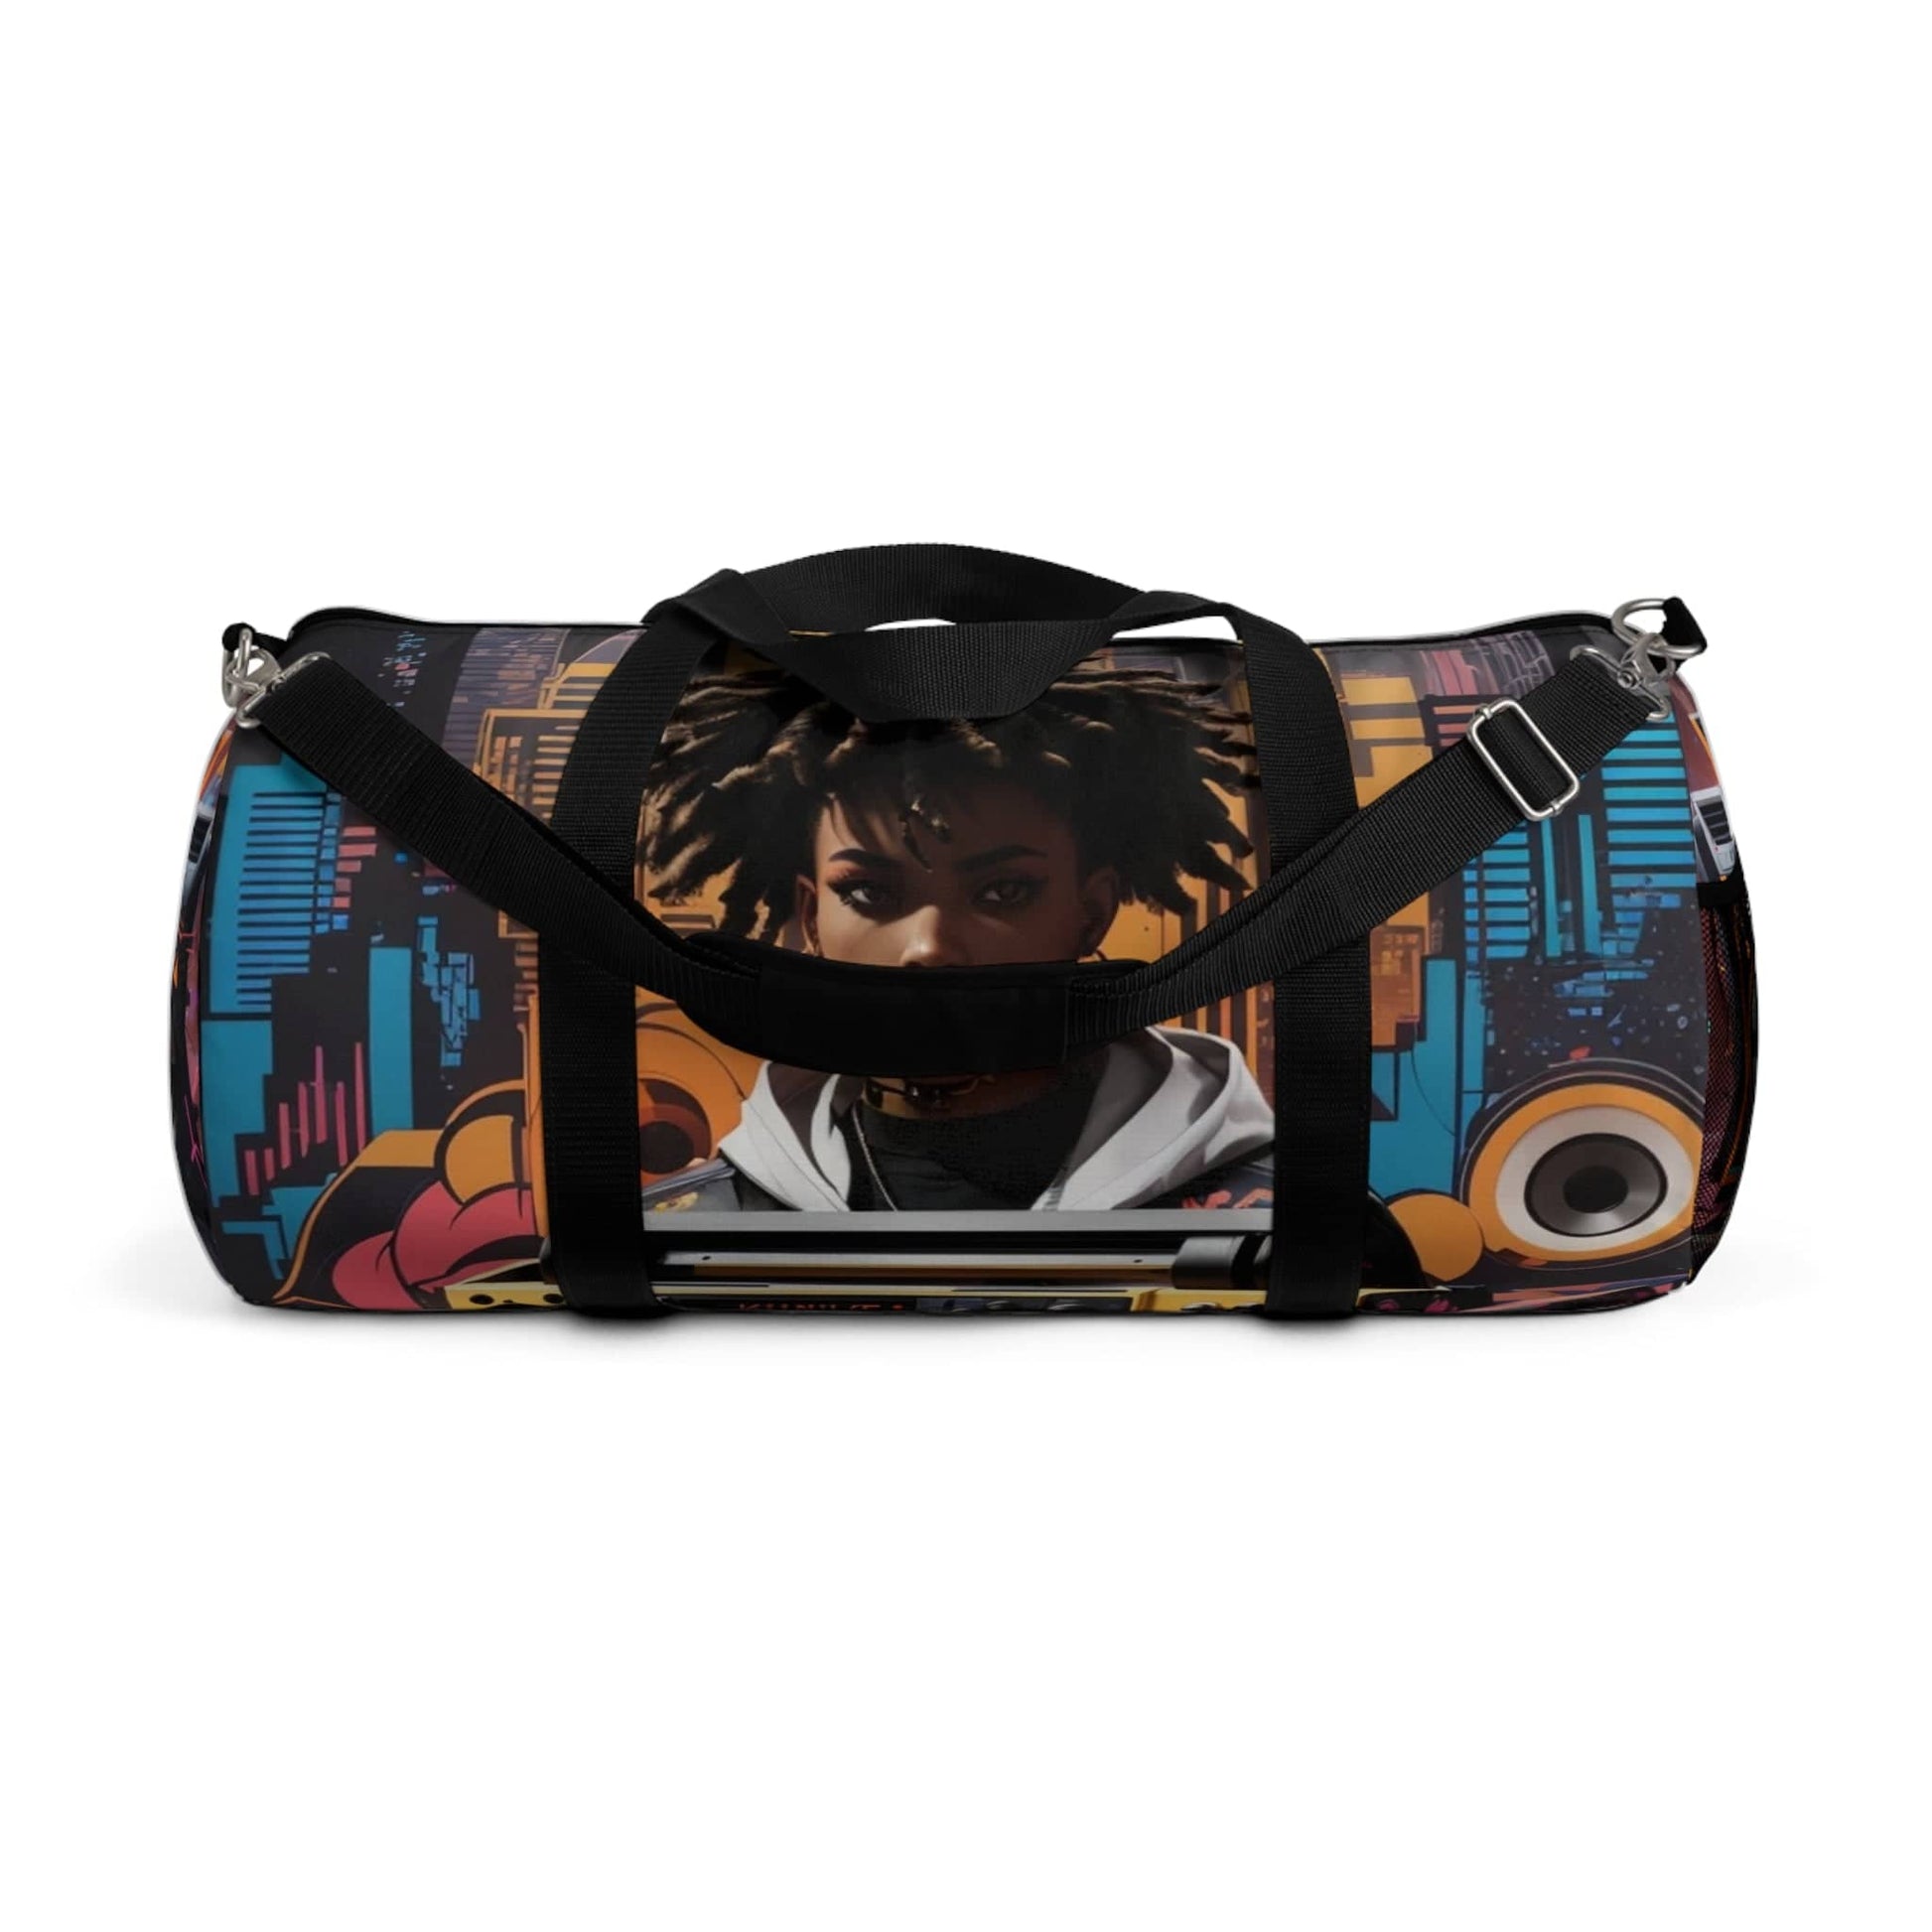 "RhythmRover: The Dynamic Canvas Hip-Hop Duffle Bag for Gym, Travel, Music Enthusiasts, and Urban Trendsetters" Bags Bigger Than Life   